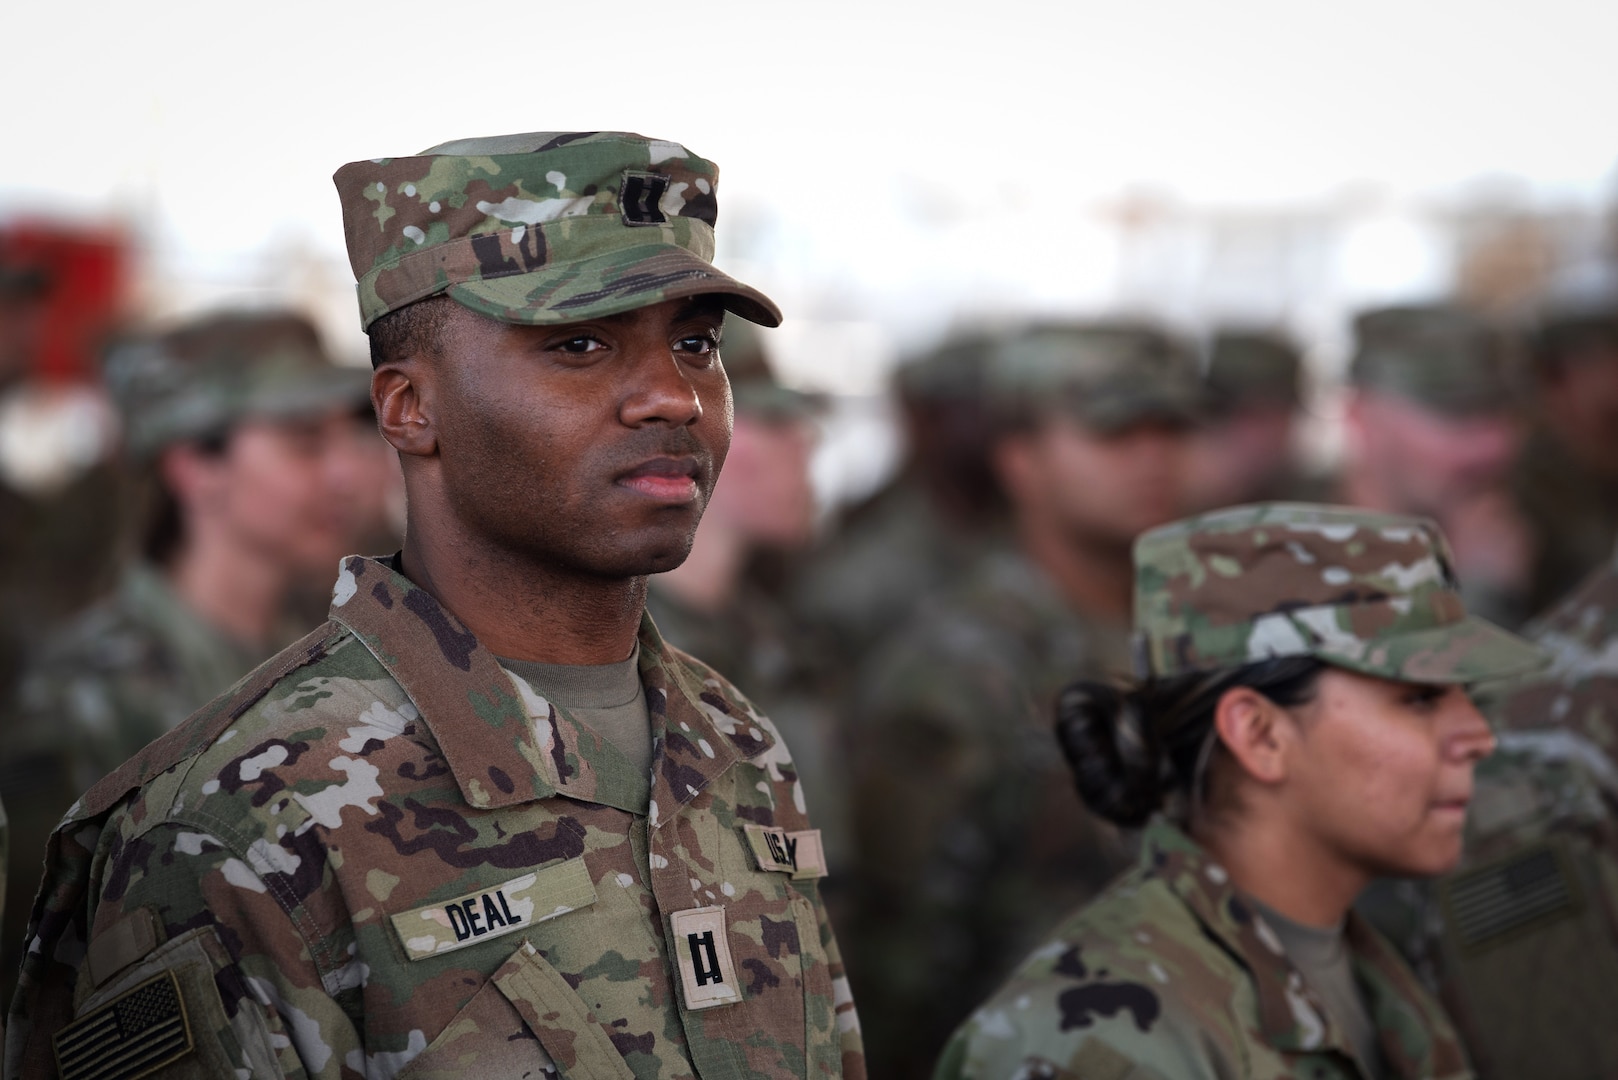 U.S. Illinois Army National Guard Capt. Aaron Deal, 404th Maneuver Enhancement Brigade, waits to receive his combat patch, a military milestone earned while serving in hostile conditions, March 17, 2022.